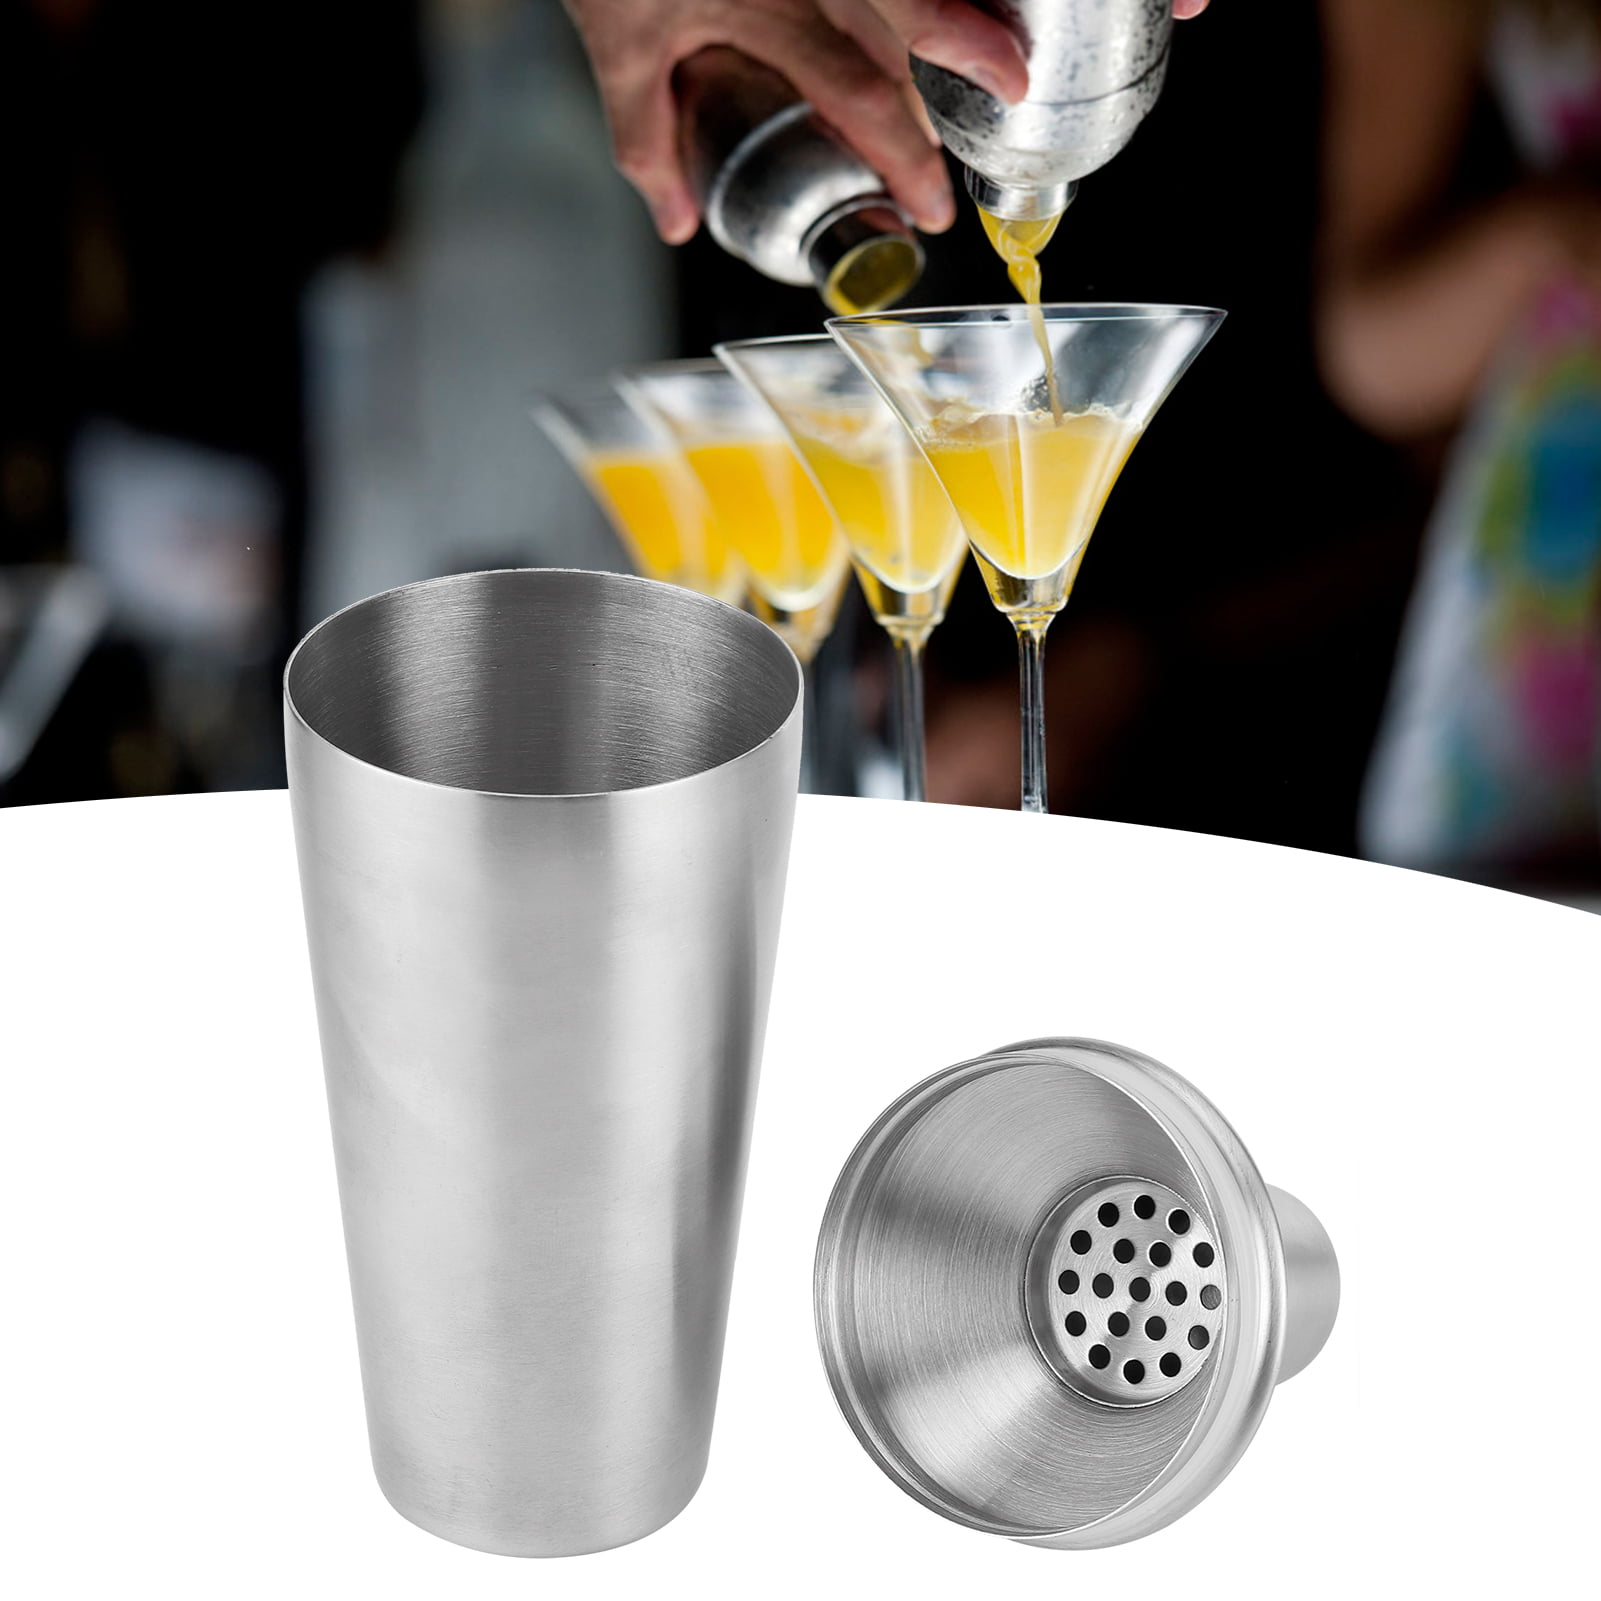 700ml Stainless Steel Cocktail Martini Shaker Party Bartending Drink Mixer 